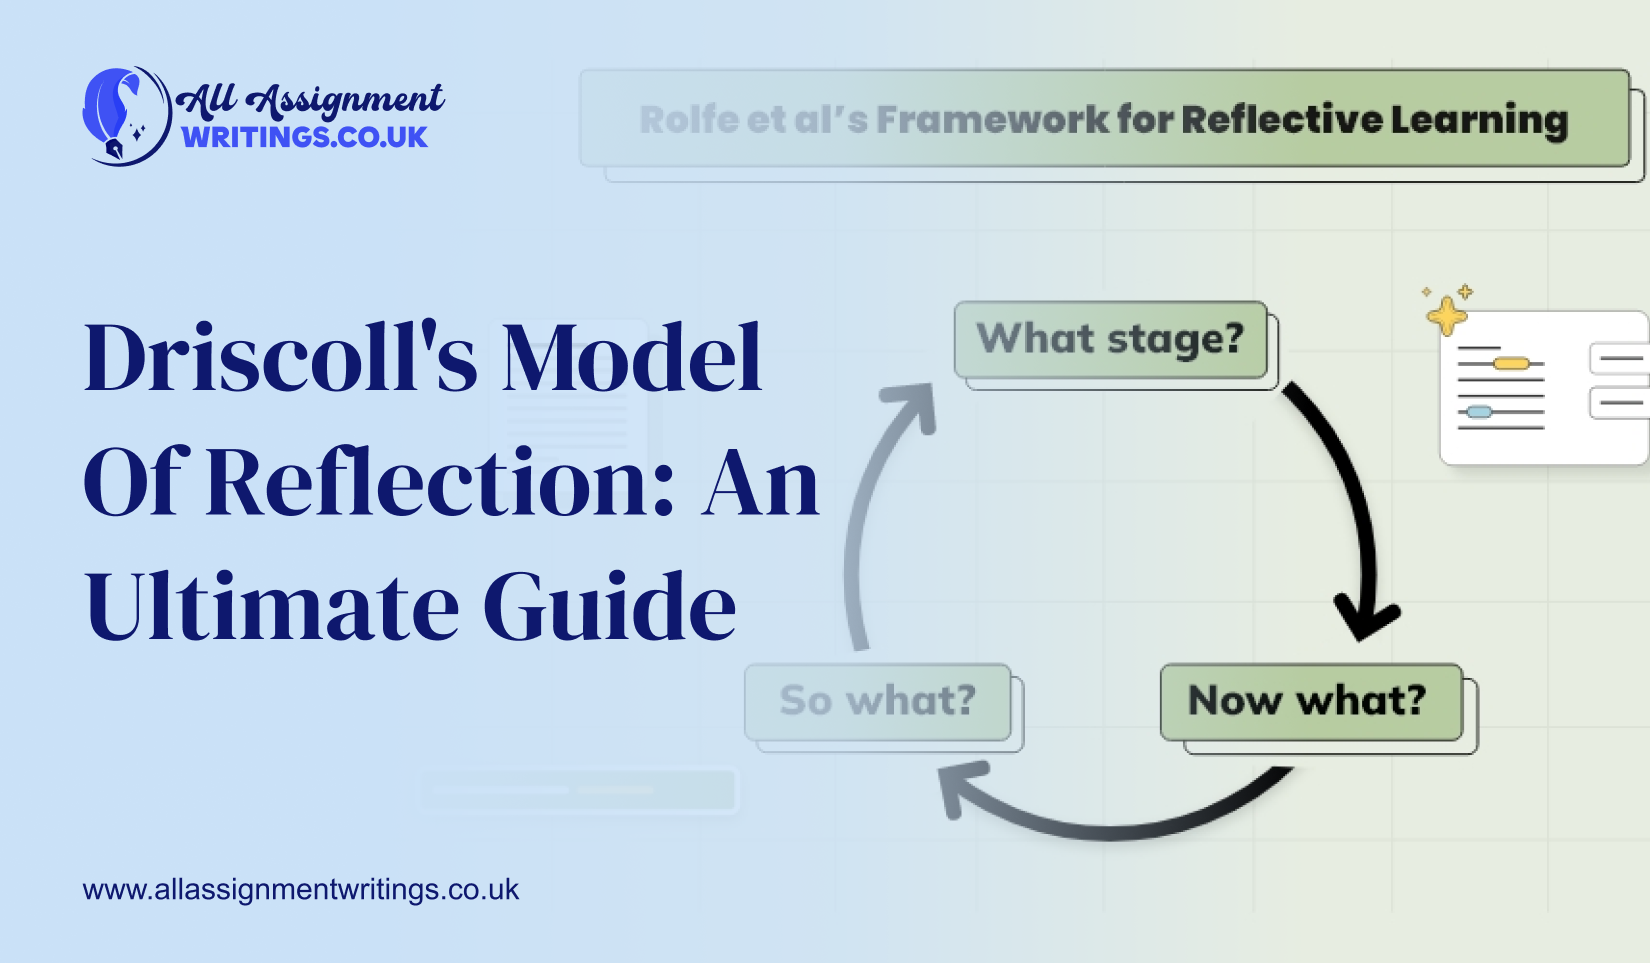 Driscoll’s Model of Reflection: An Ultimate Guide